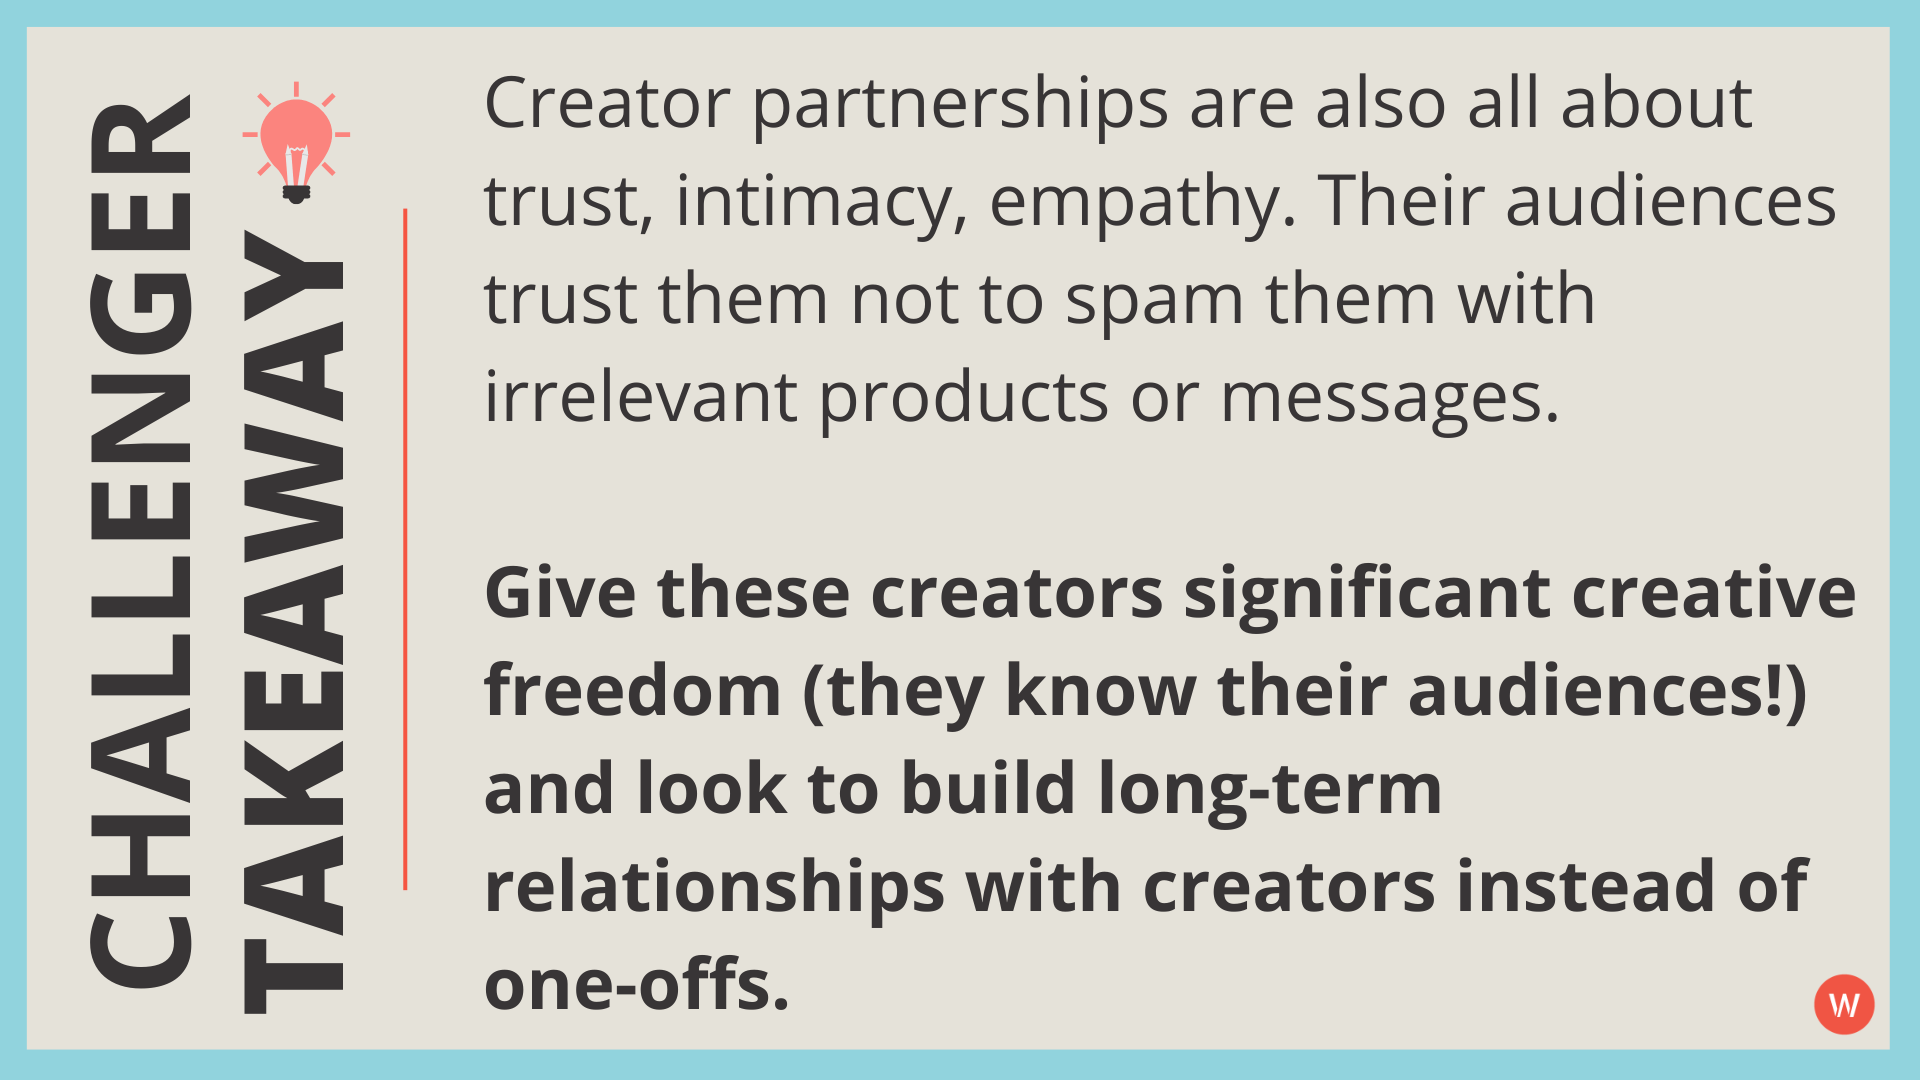 Creator partnerships are built on trust and empathy